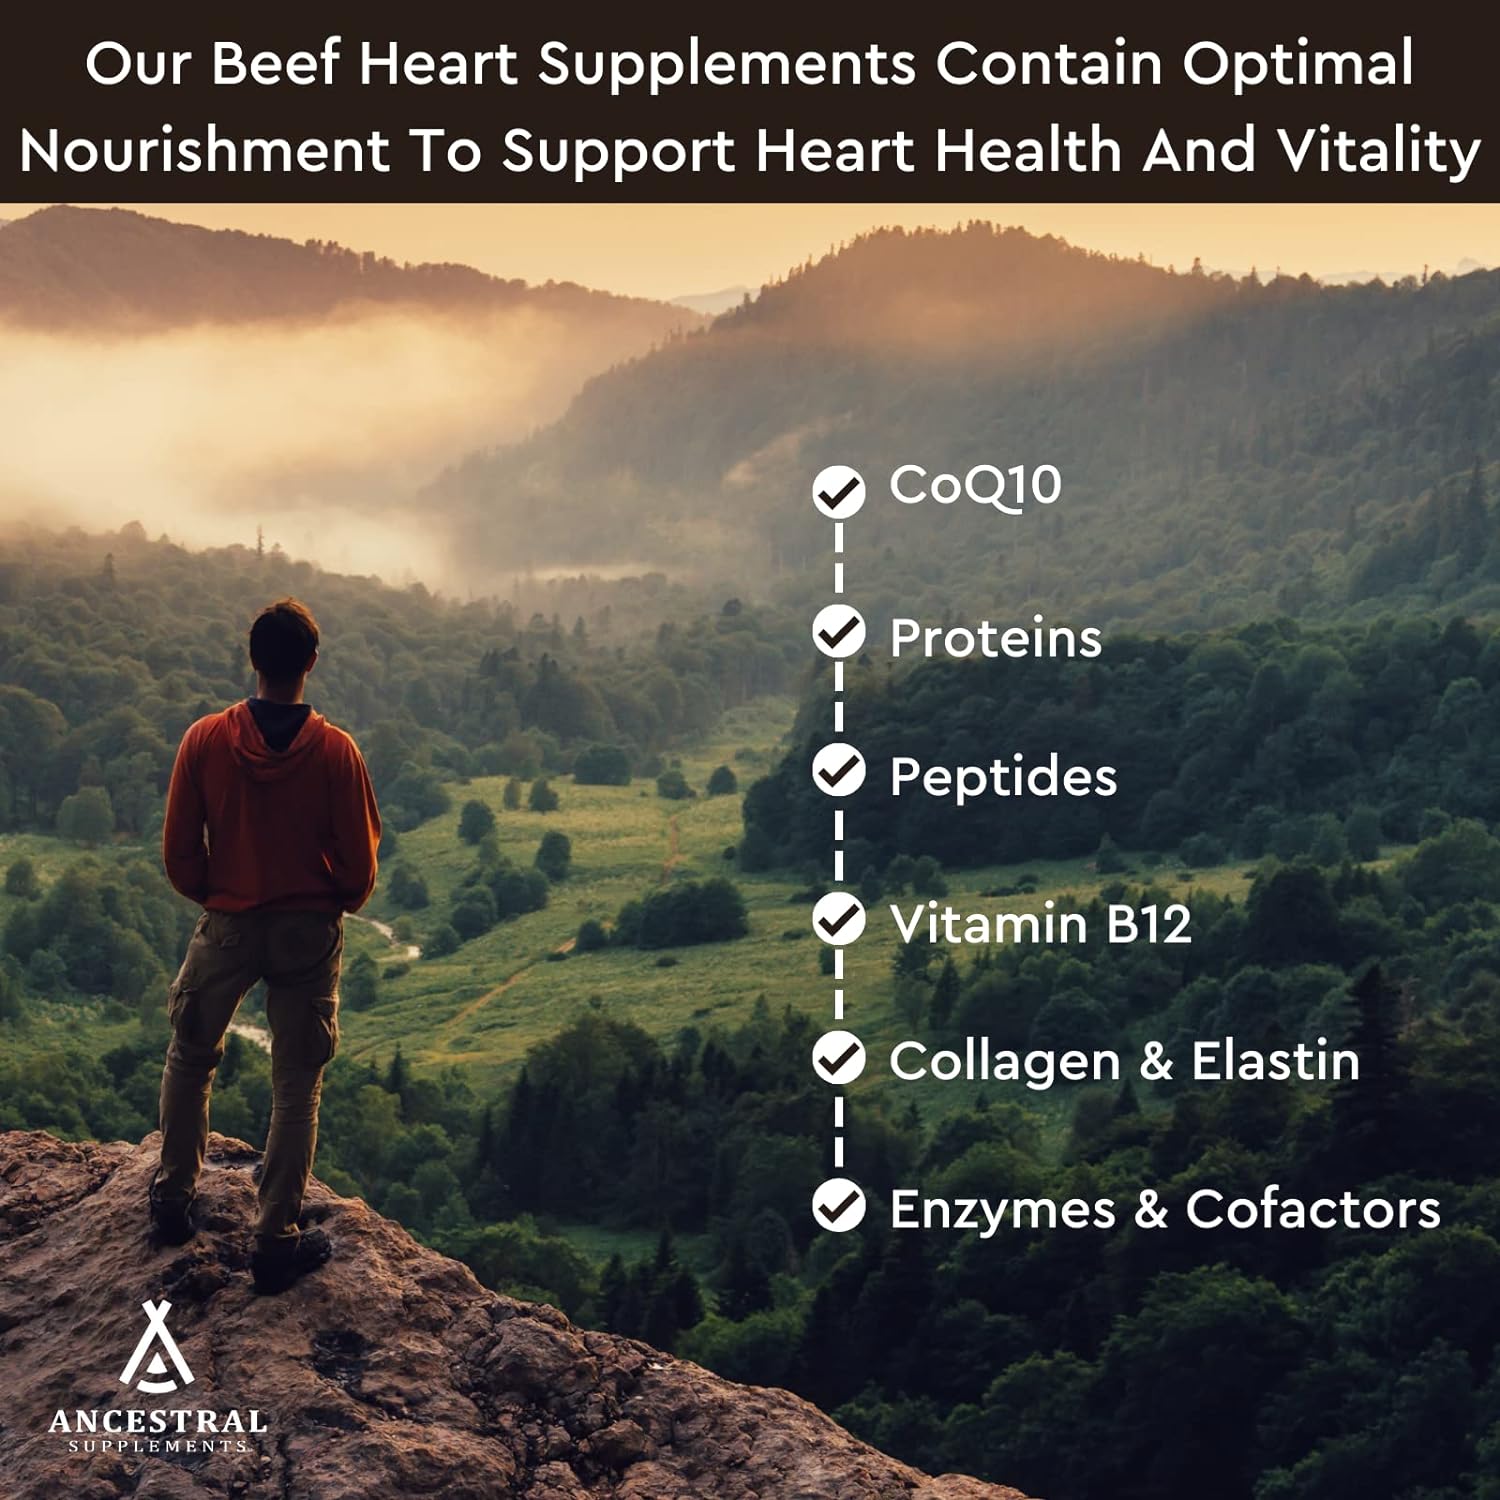 Ancestral Supplements Grass Fed Beef Heart Supplement, 3300mg, CoQ10 Supplement with Grass Fed Beef Liver, Supports Energy, Immune, Heart and Mitochondrial Health, Non GMO, 180 Capsules : Health & Household